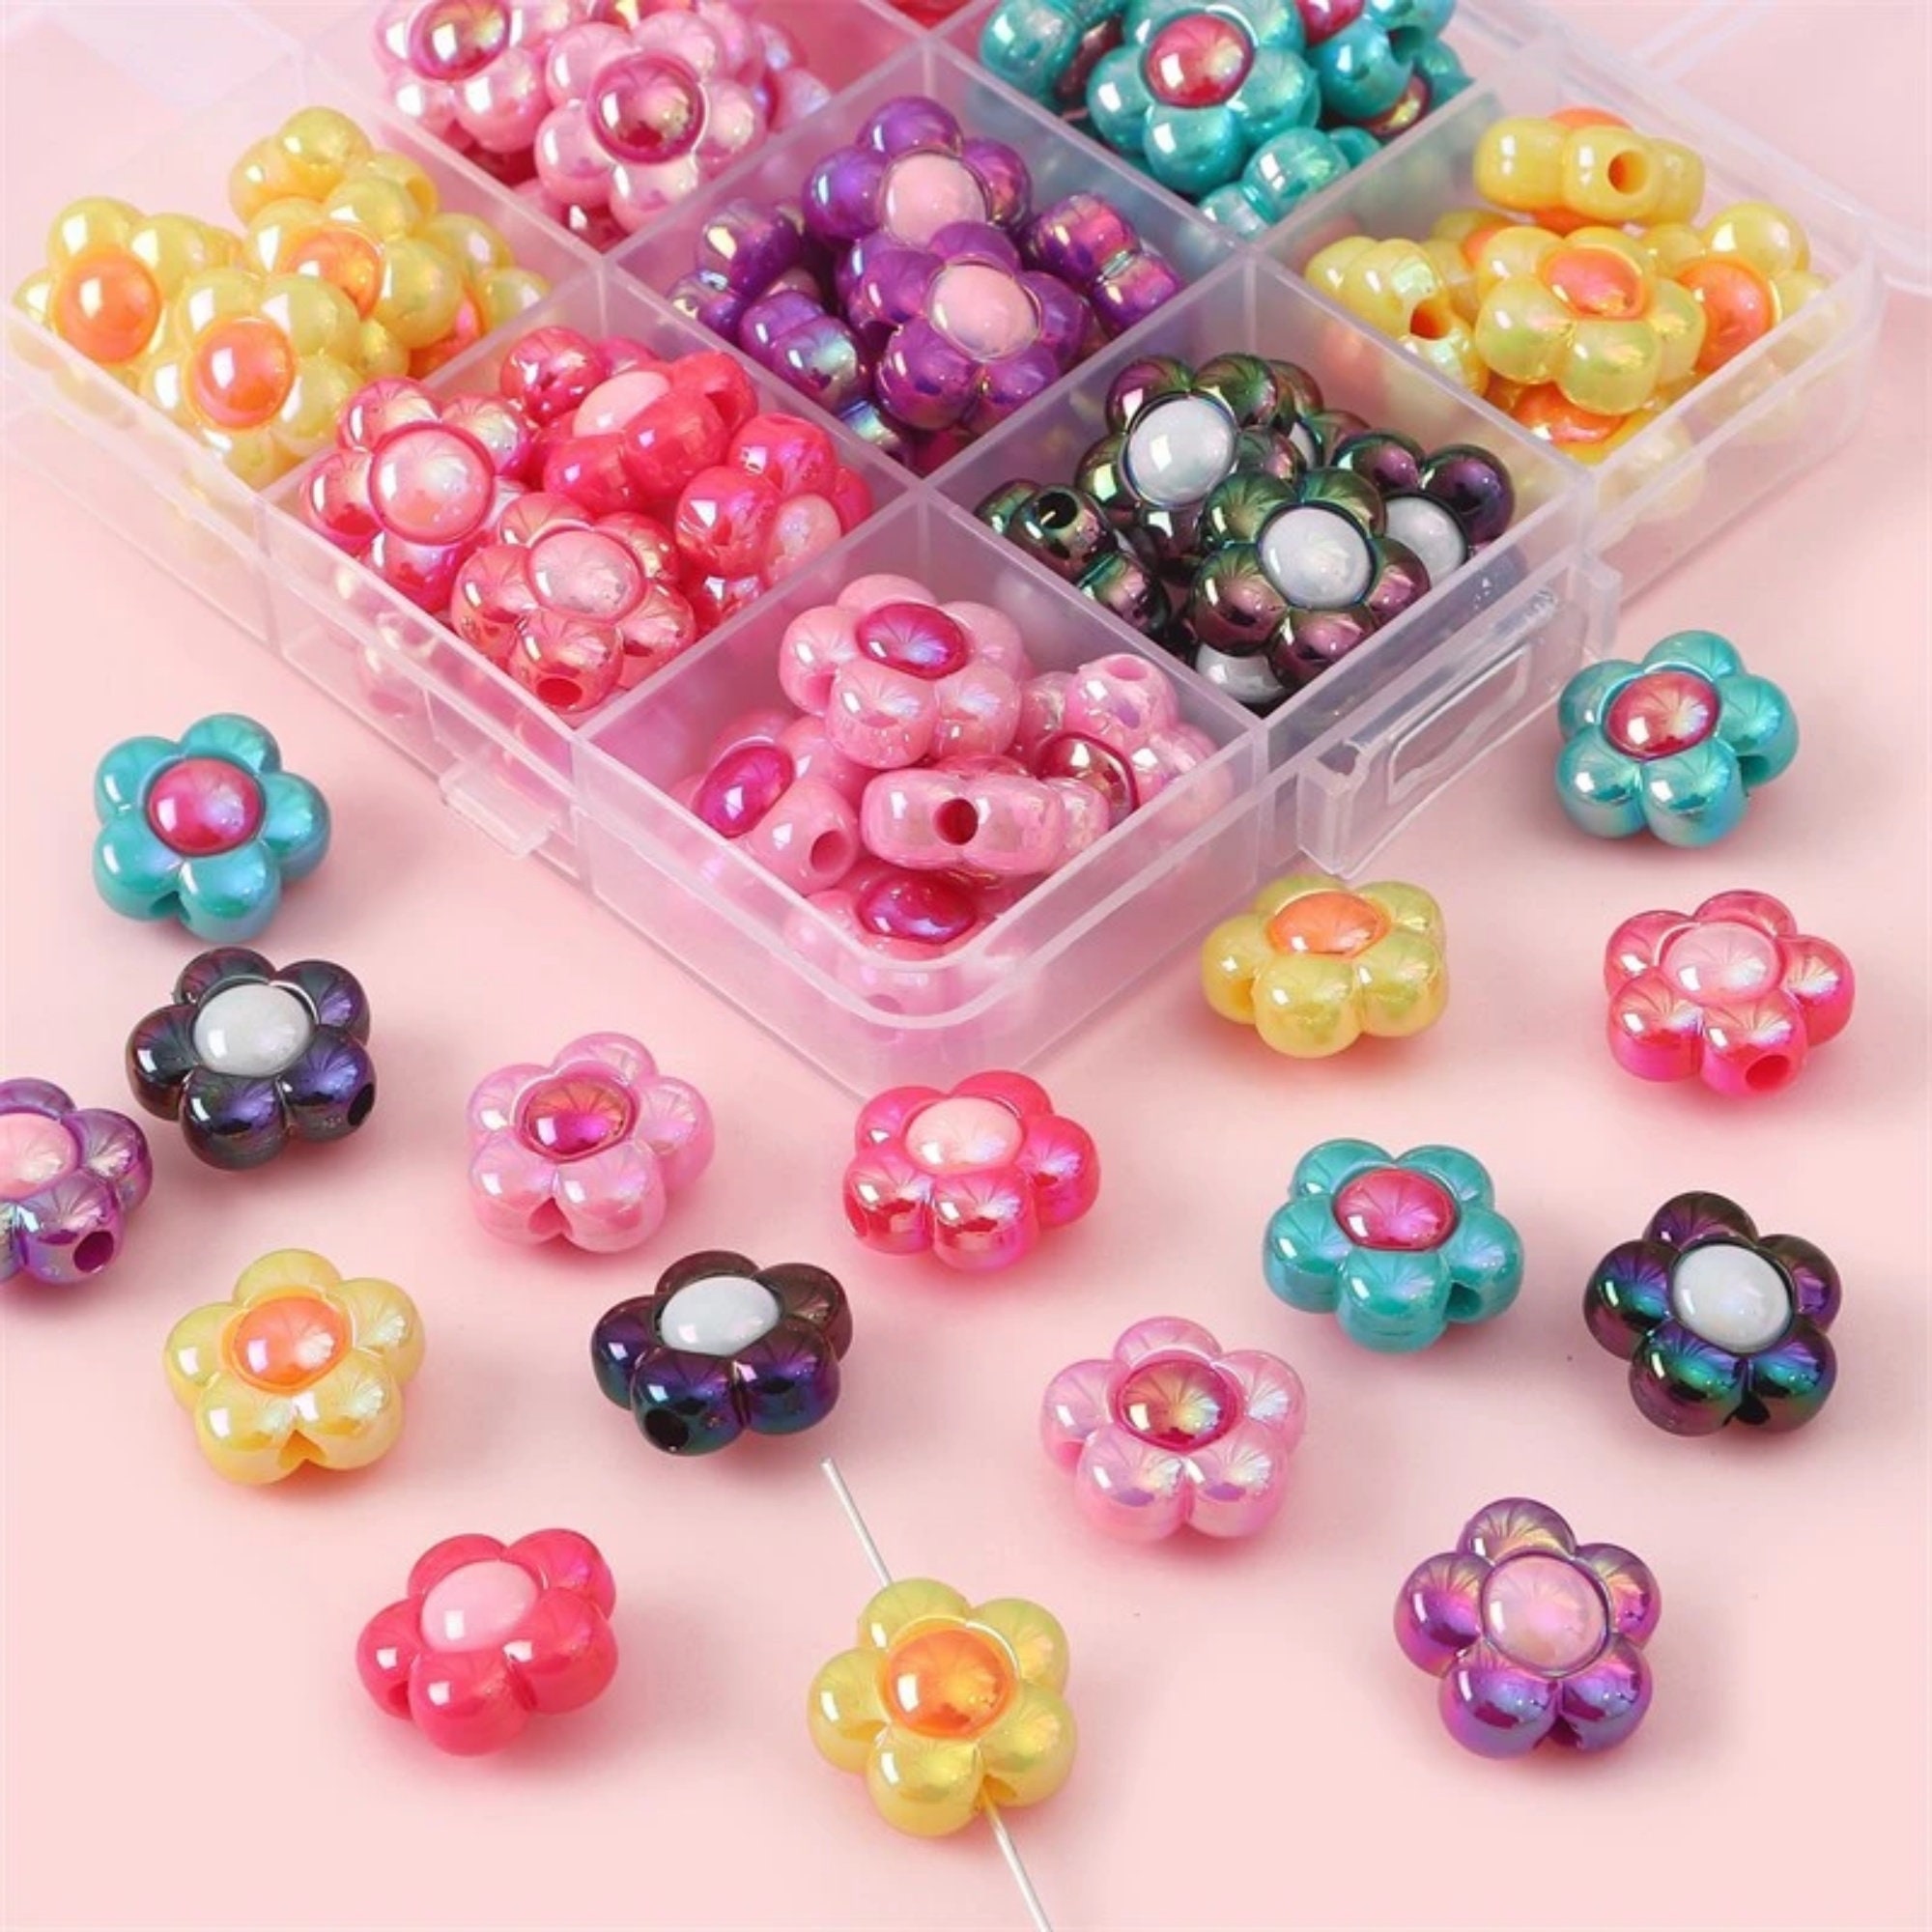 Acrylic Flower Beads, Assorted 50 Gr Pack, Approx 195 Beads